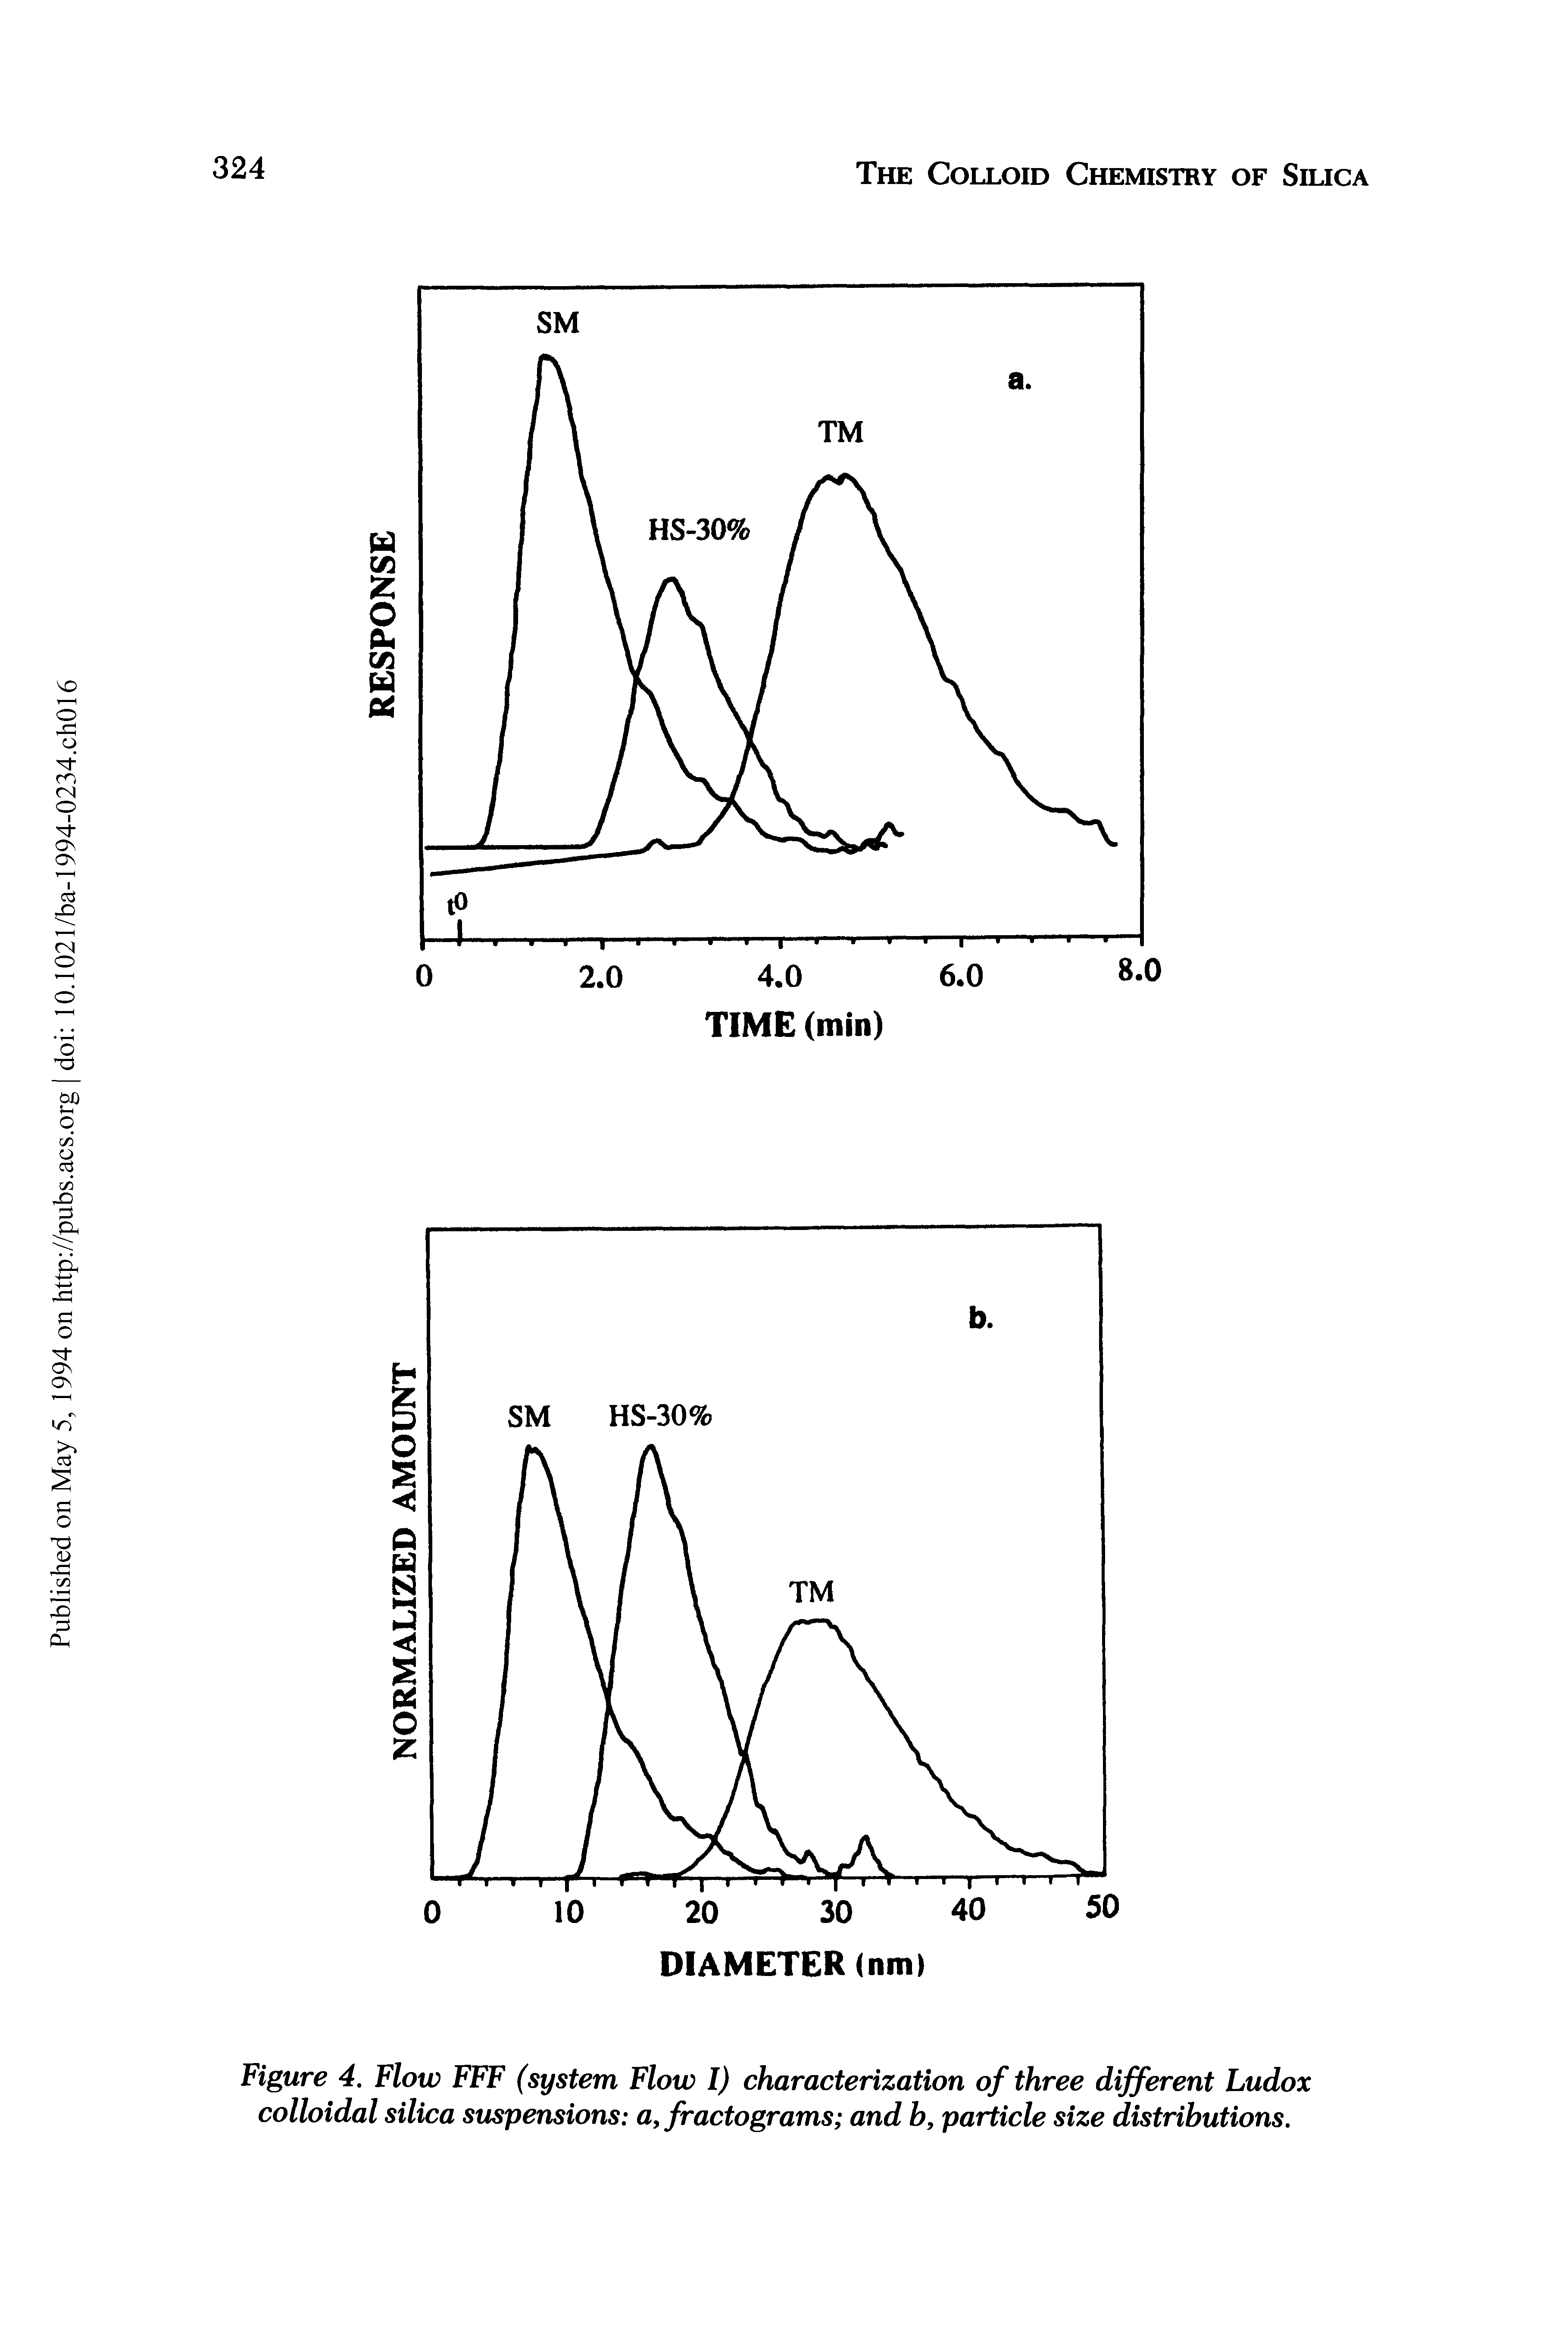 Figure 4. Flow FFF (system Flow I) characterization of three different Ludox colloidal silica suspensions a, fractograms and b, particle size distributions.